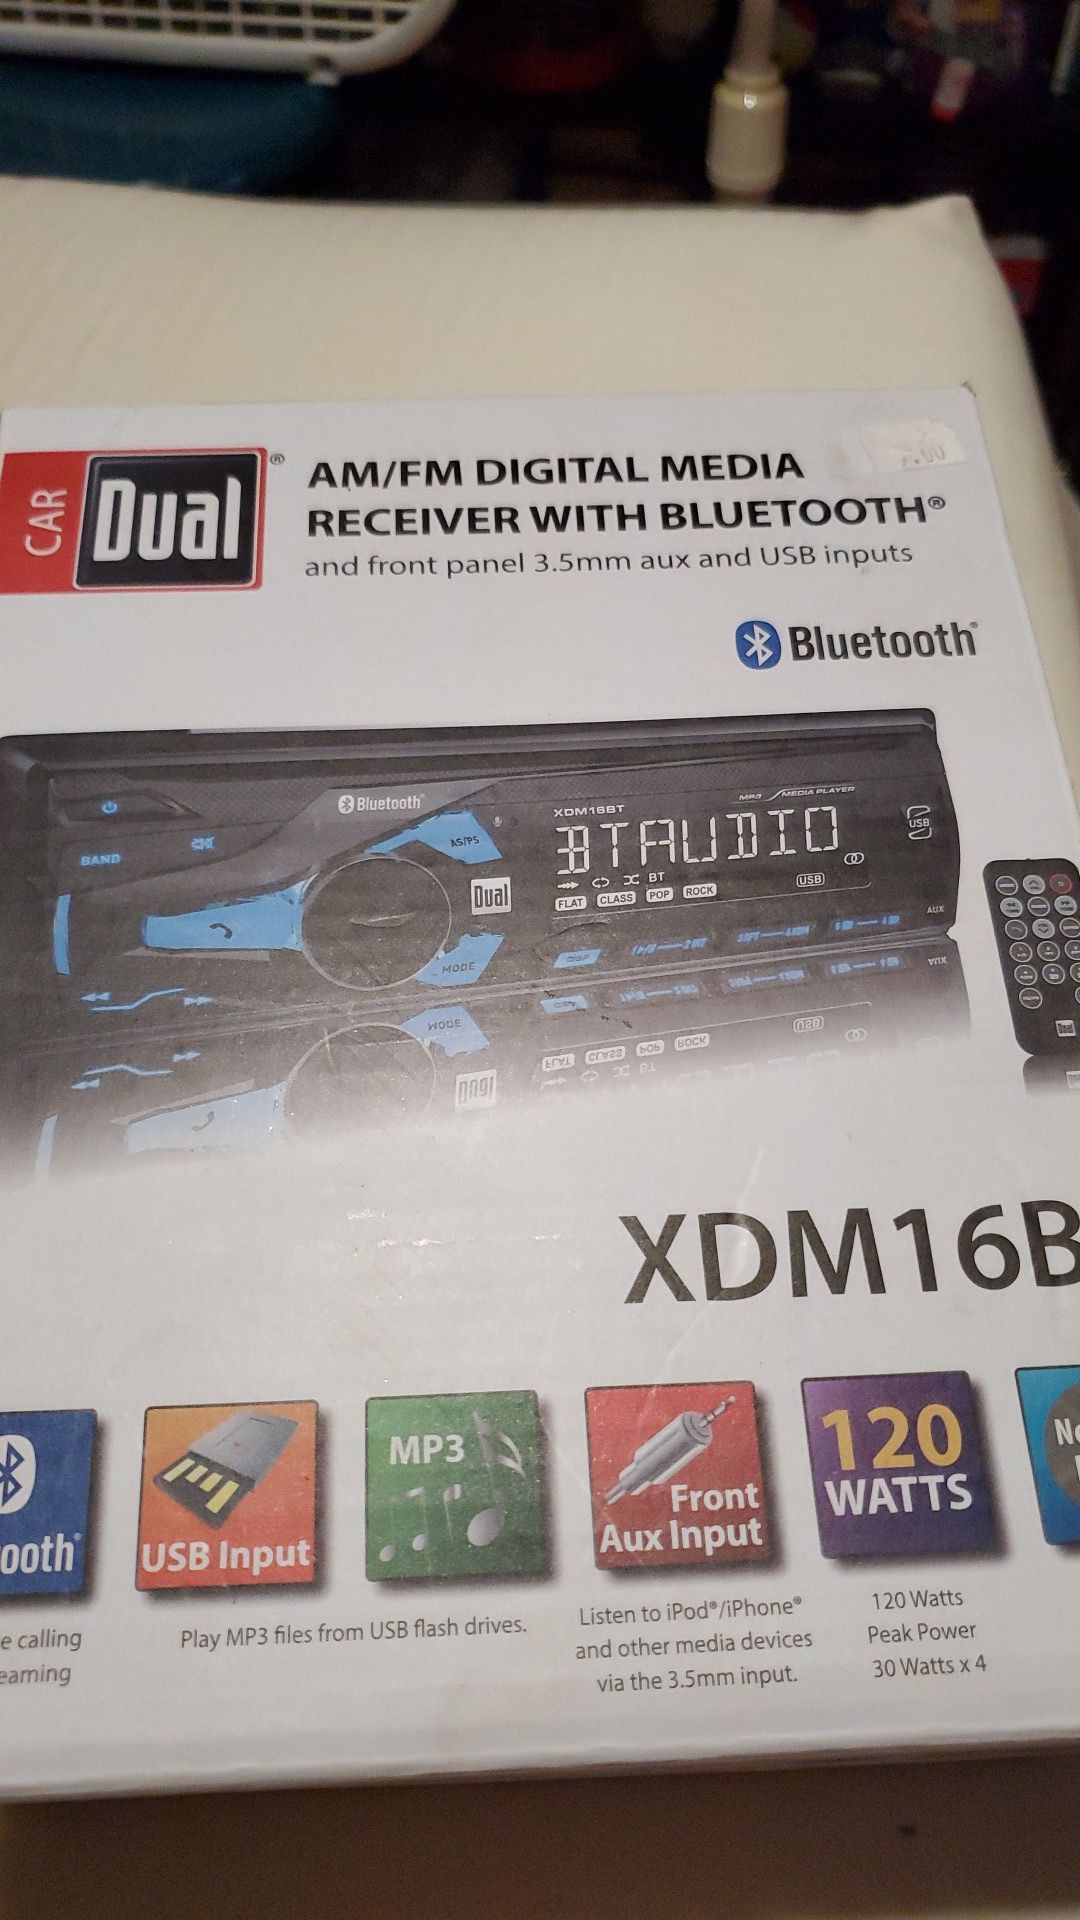 Media receiver with bluetooth